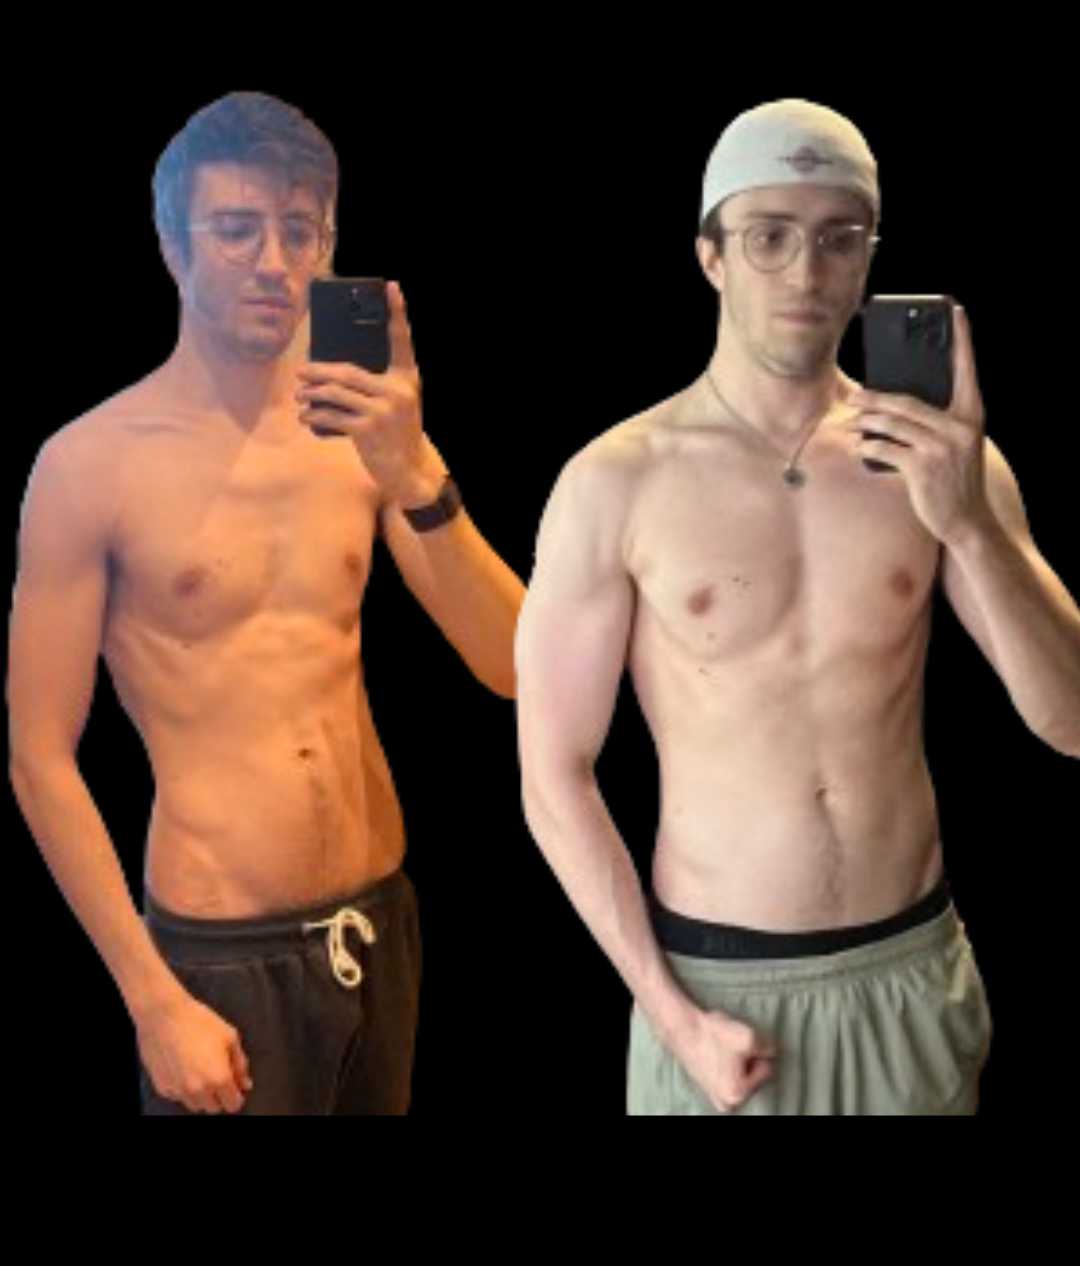 Maju Brothers online personal trainer results